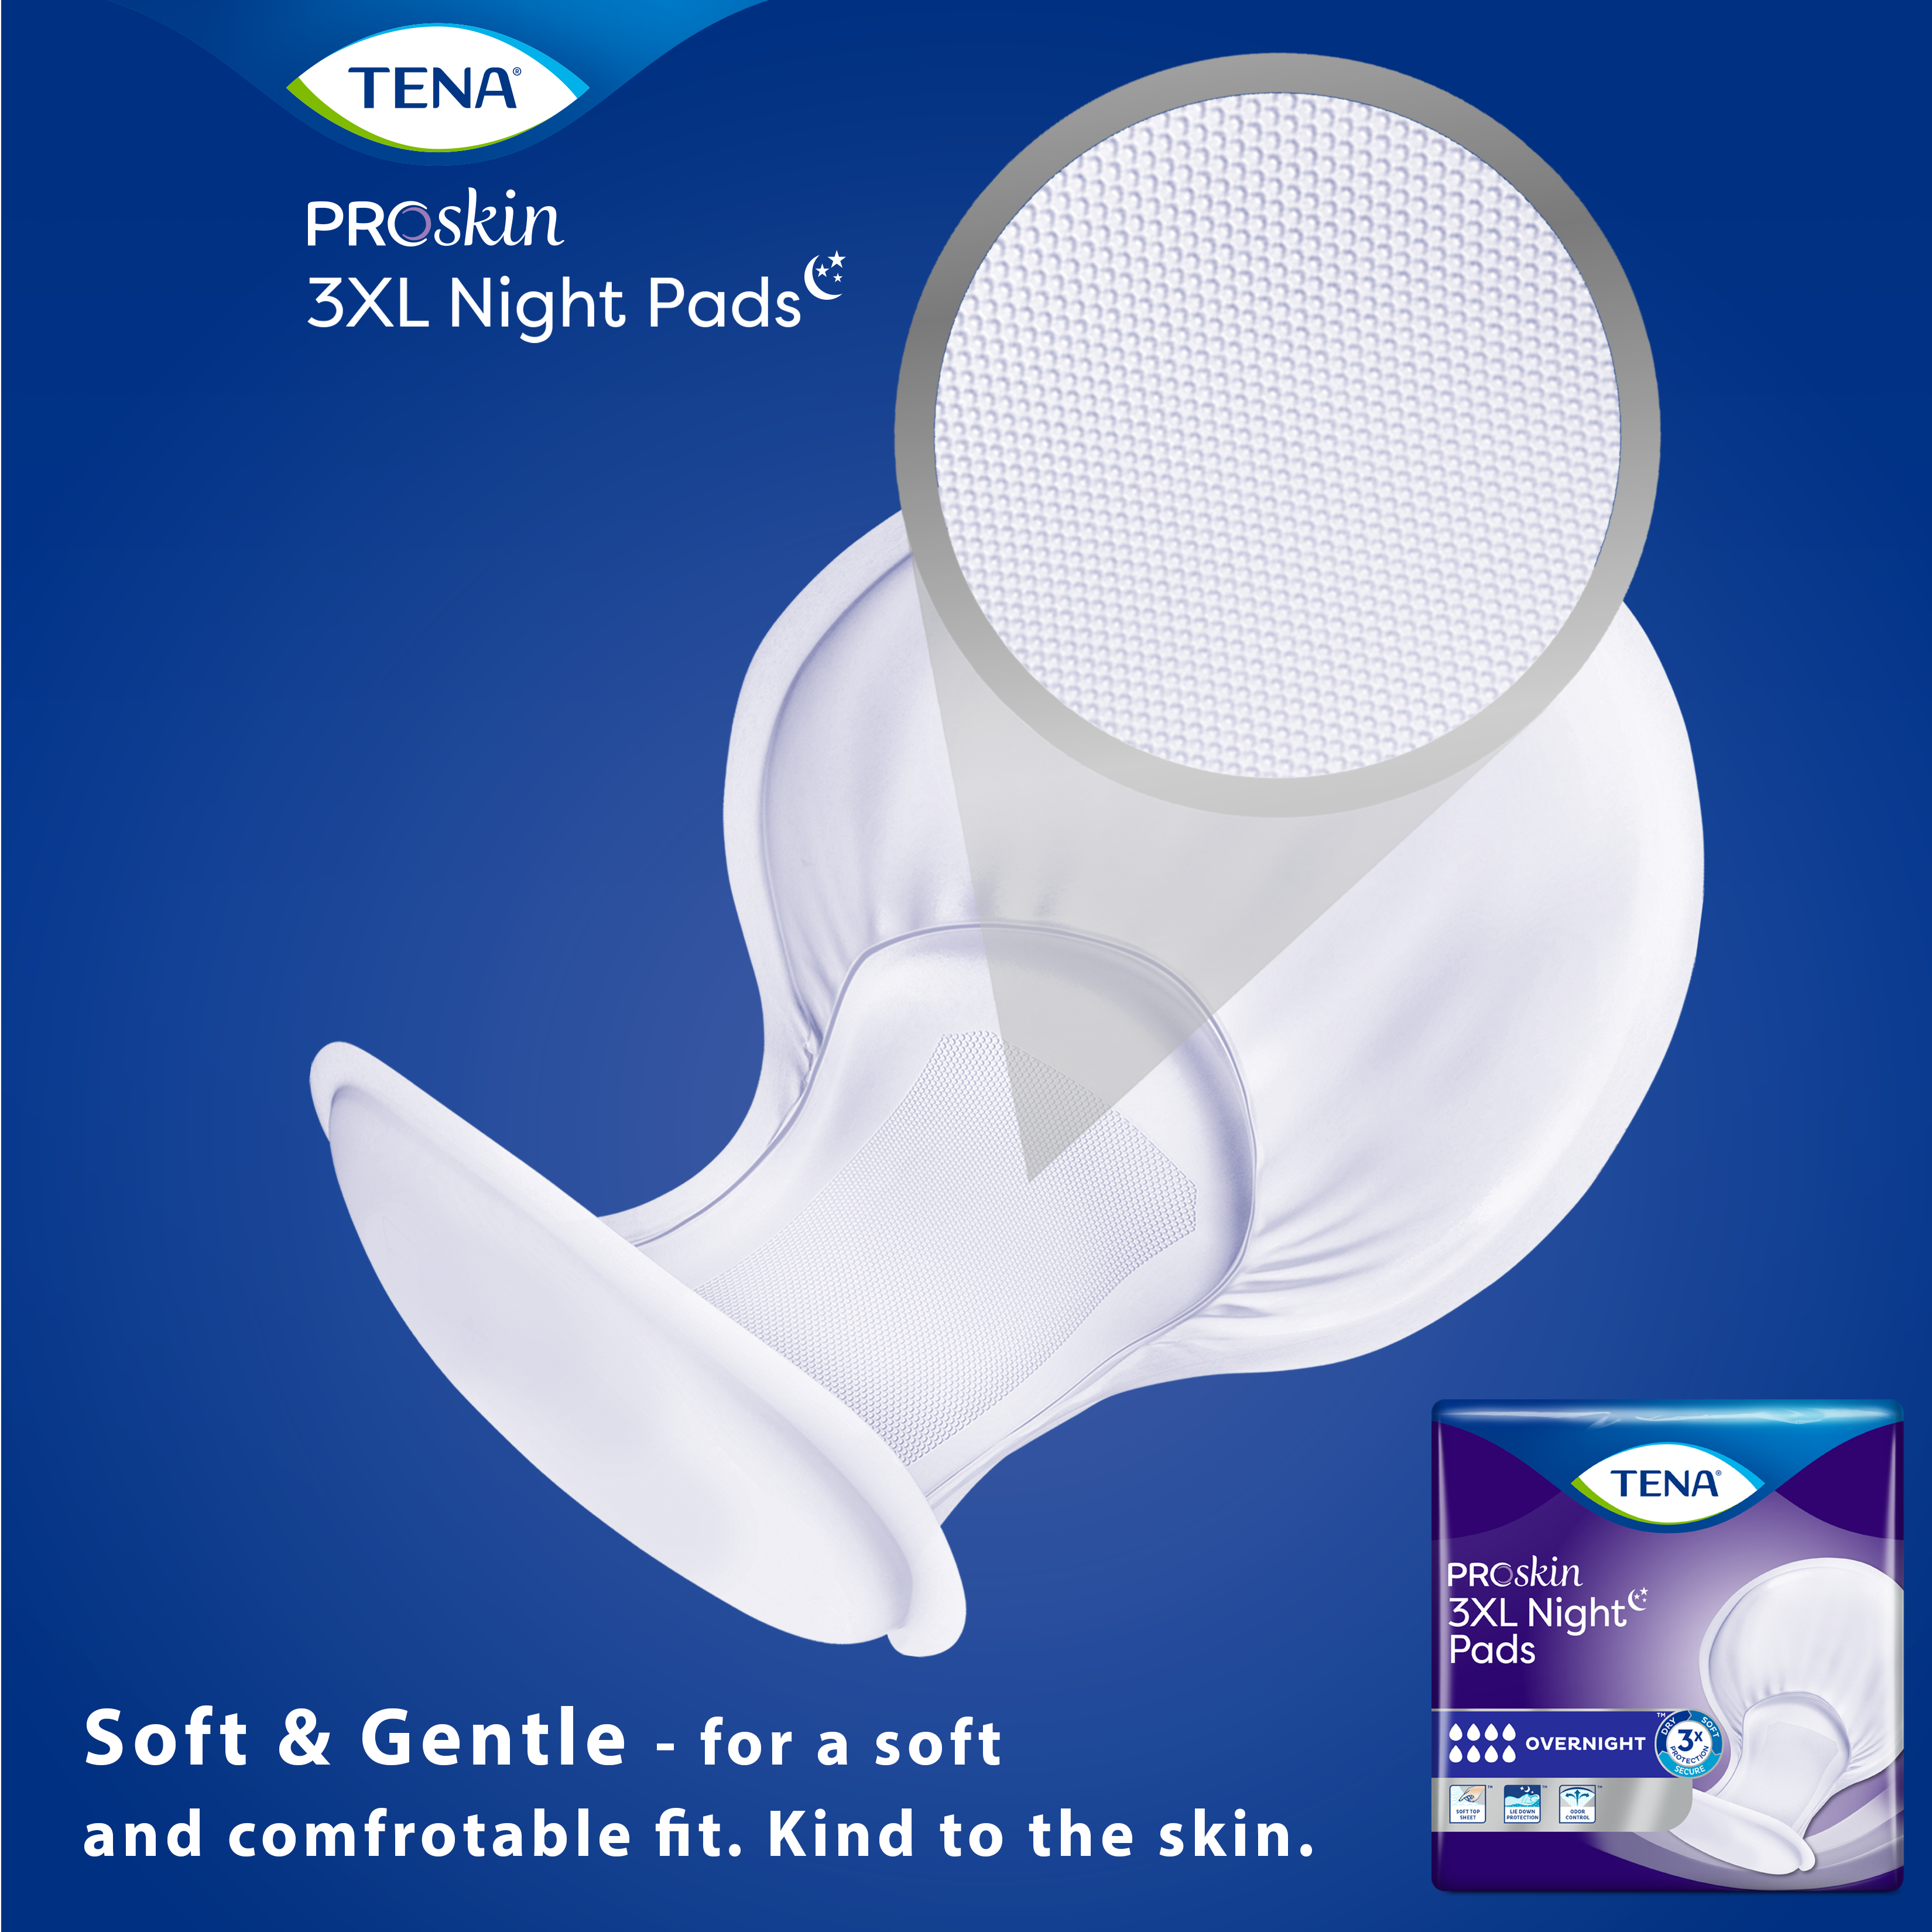 An image of a package and product of 3xl night pads, with words soft and gentle